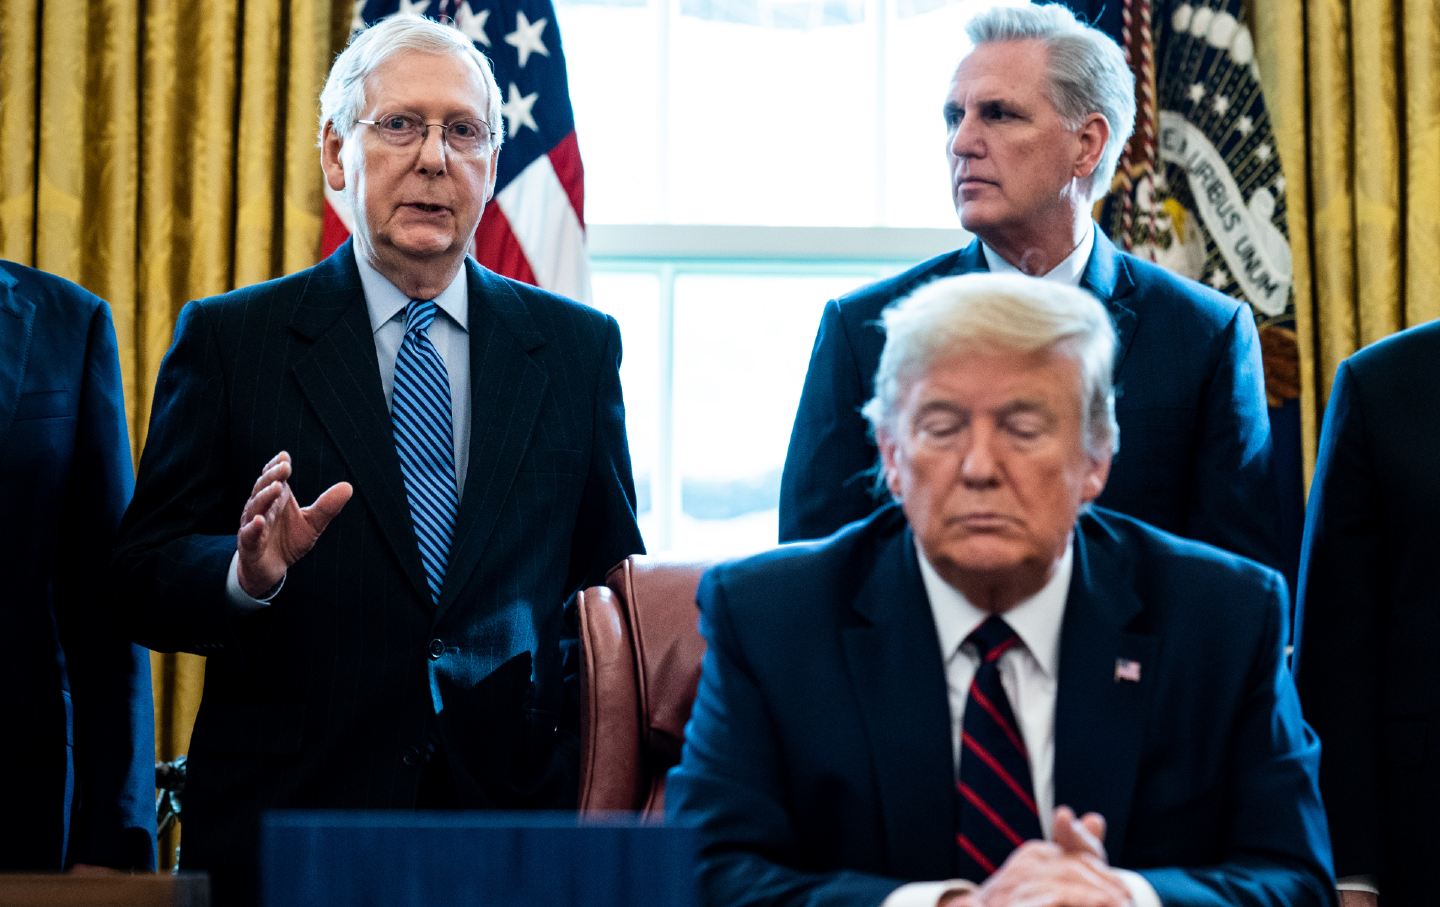 Donald Trump sits at a desk with Mitch McConnell and Kevin McCarthy standing behind him